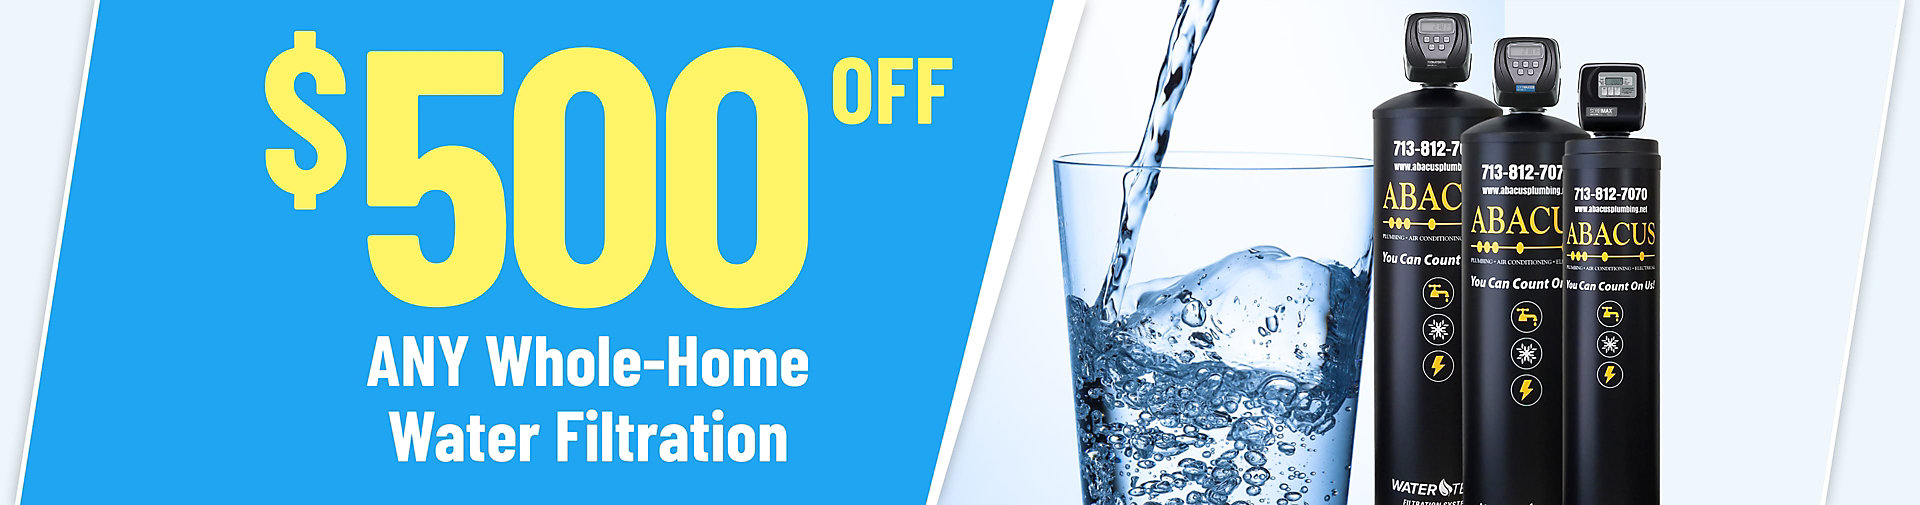 $500 Off Water Filtration